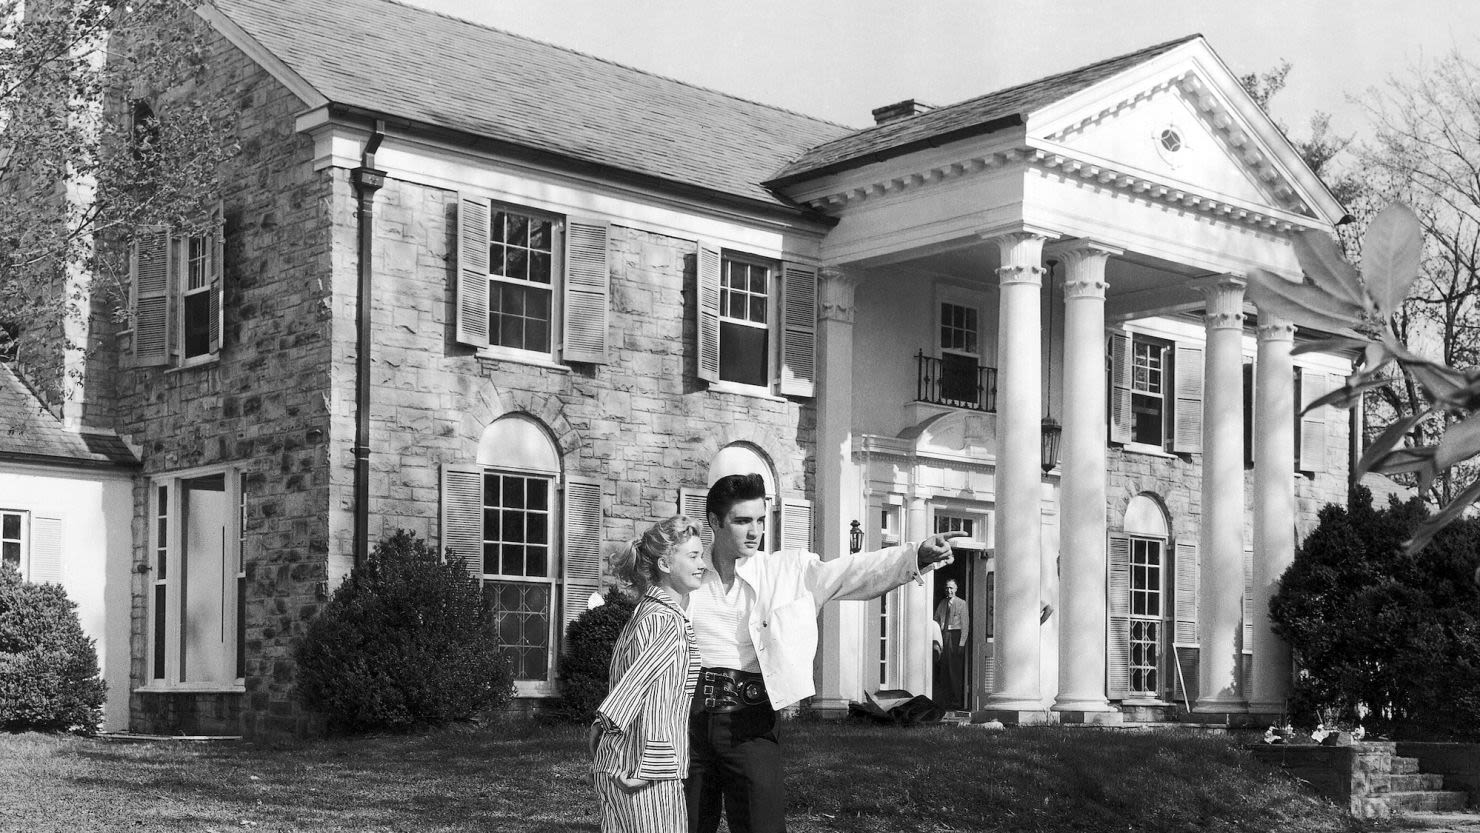 Opinion: A target for scammers, Graceland still embodies Elvis Presley and the American Dream | CNN